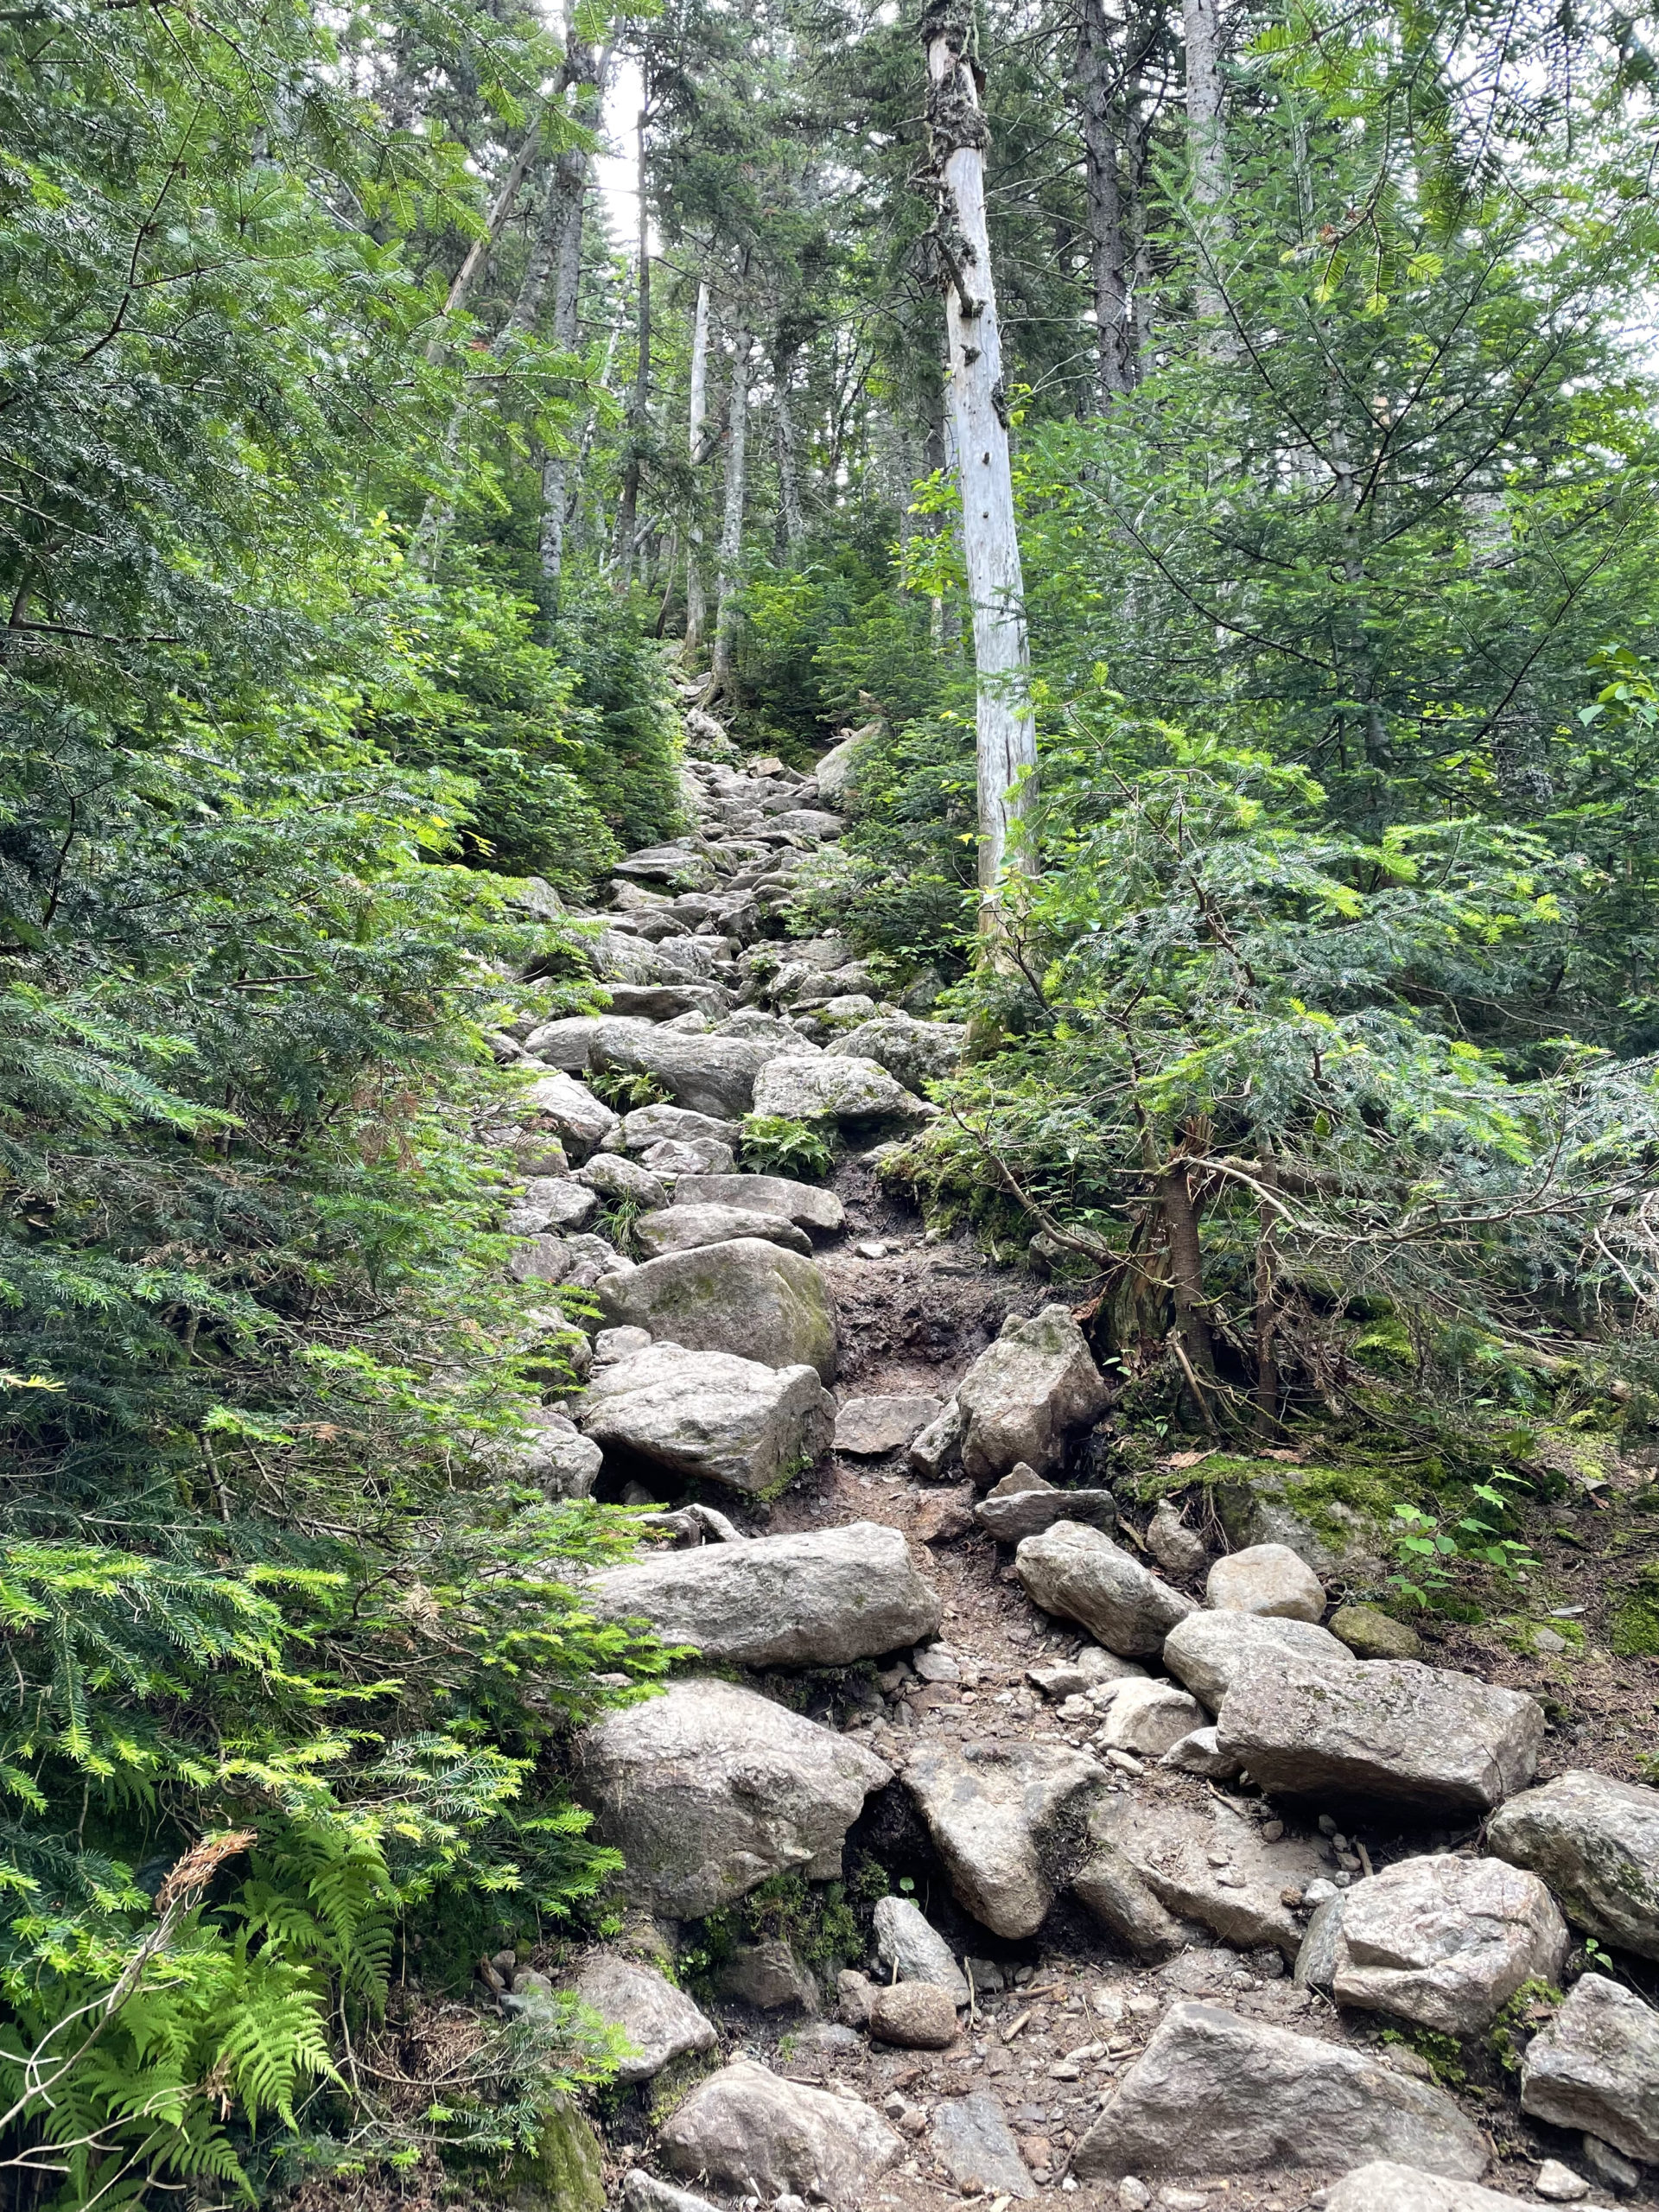 Rocky ascent, seen while hiking Mt. Pierce and Mt. Jackson in the White Mountains National Forest, New Hampshire